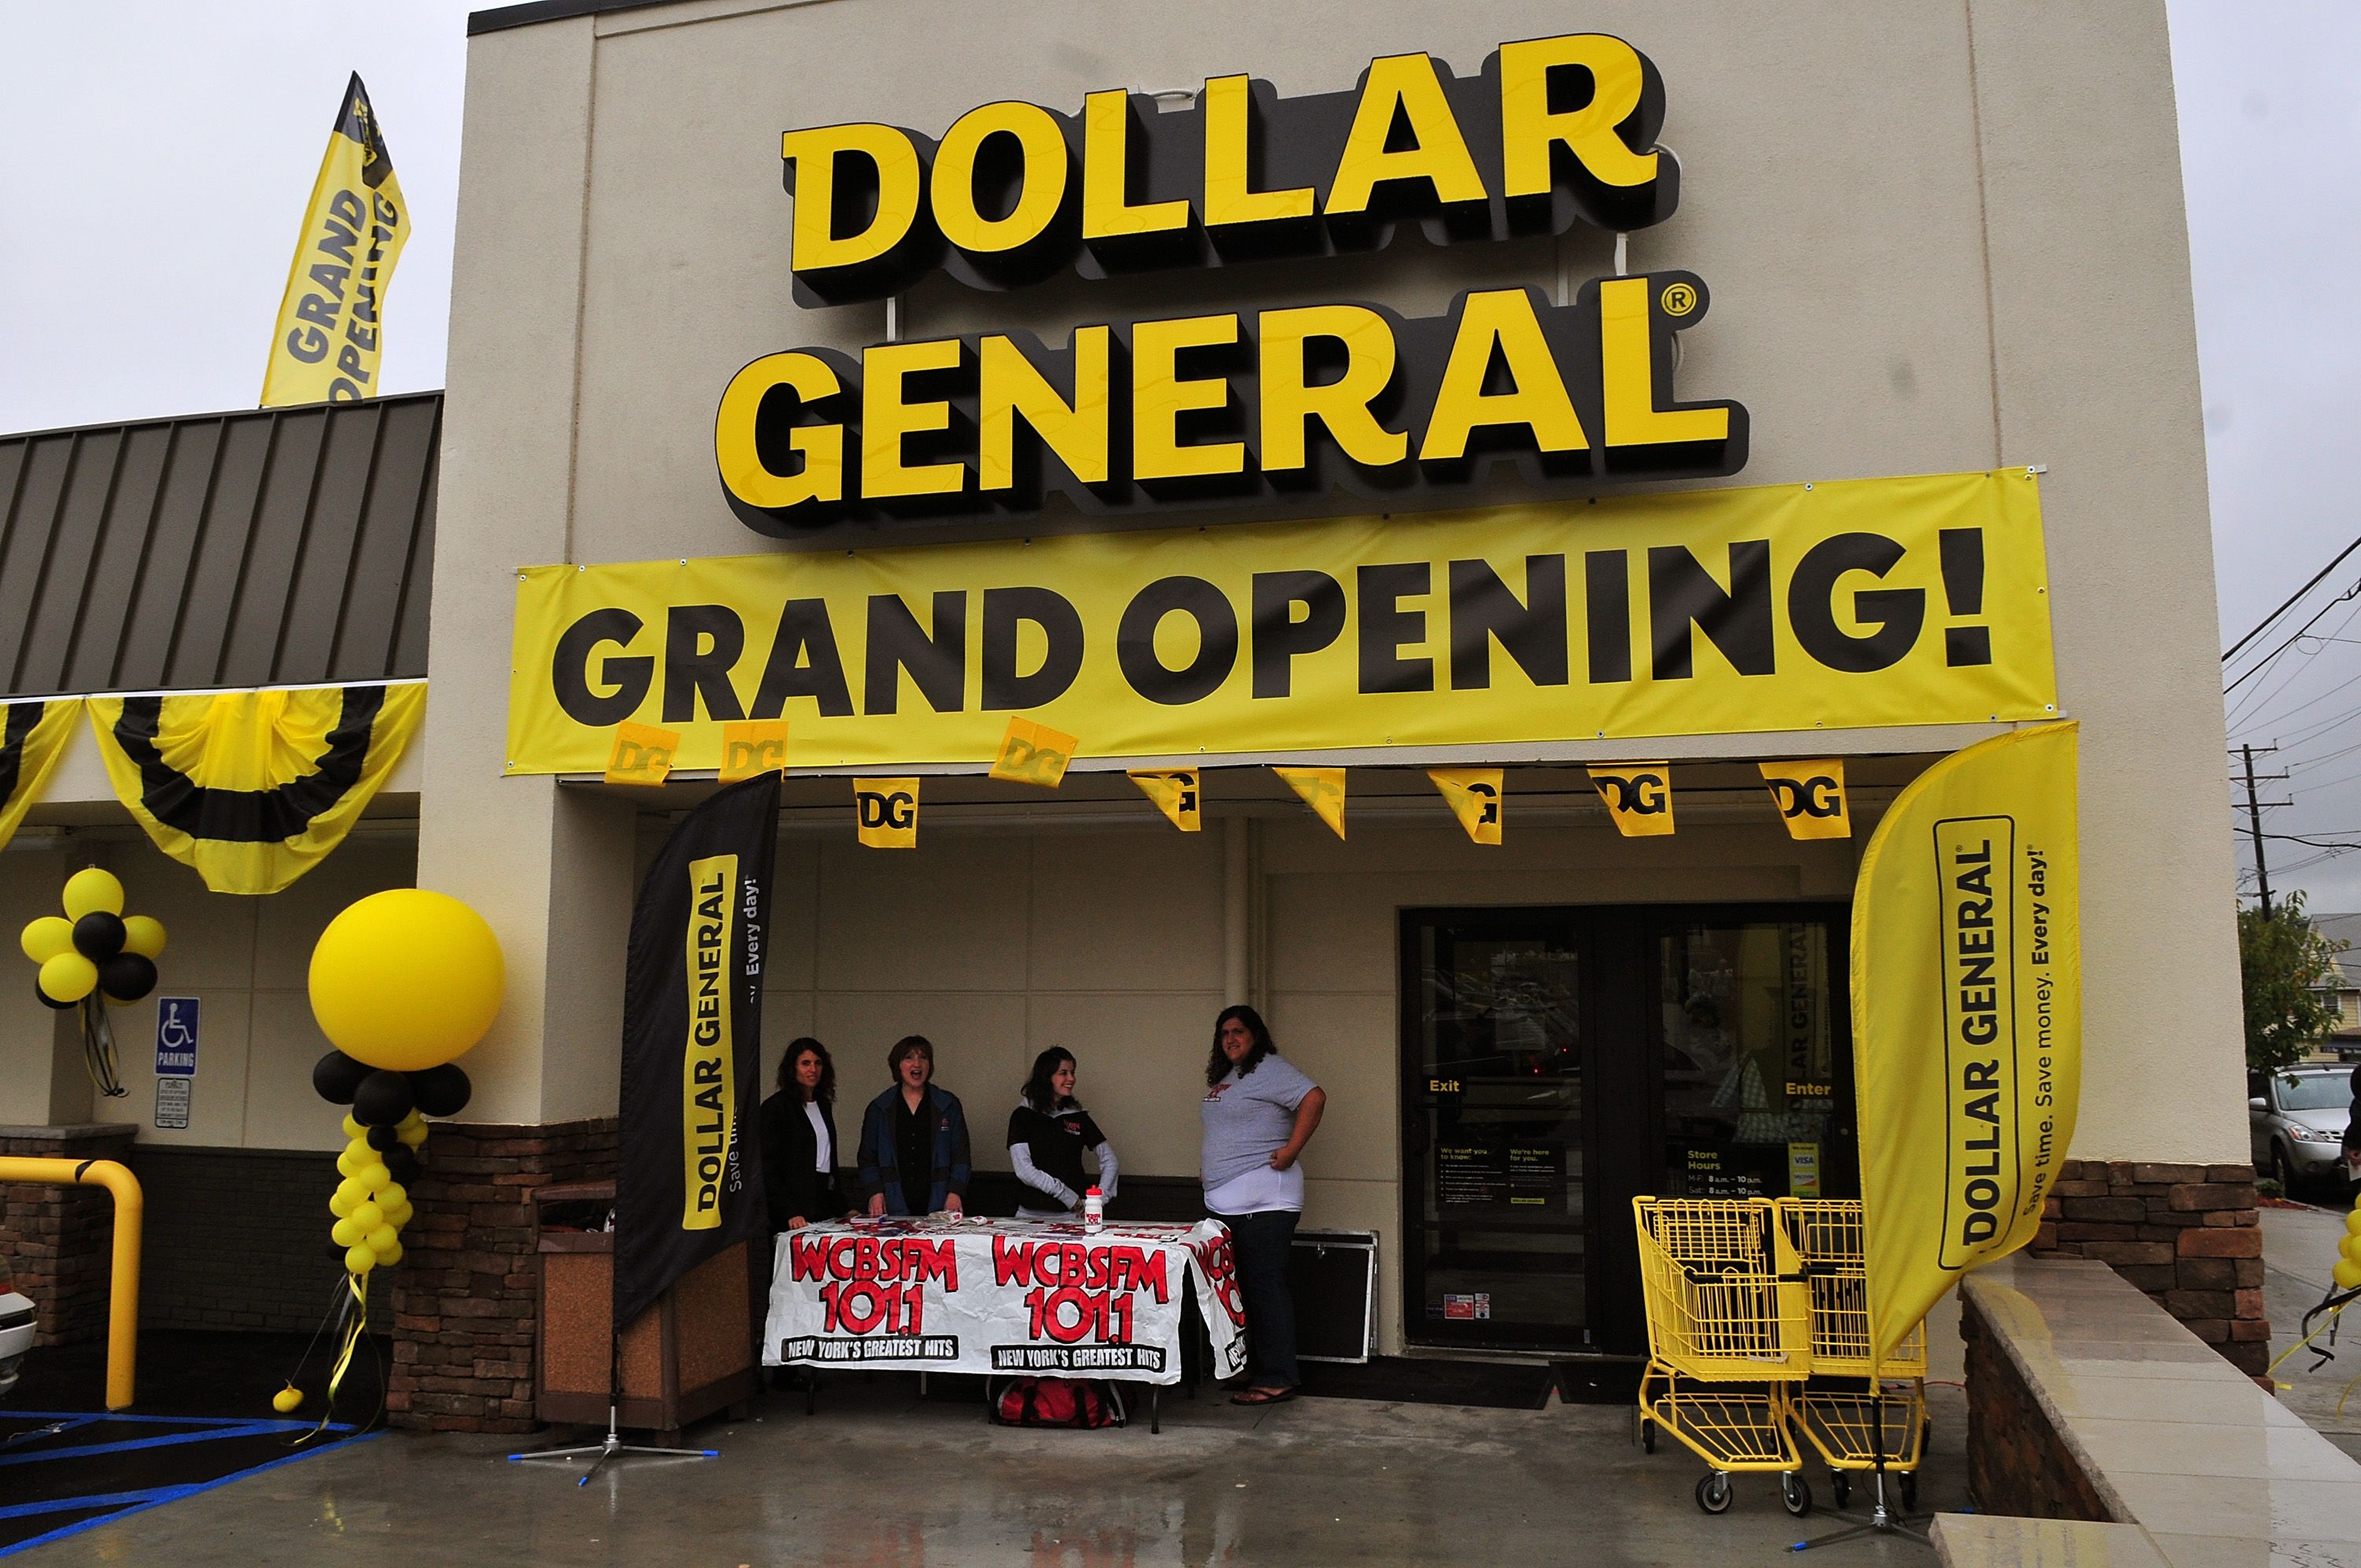 Dollar General highlights $1 items after rival dollar store chain forced to  raise prices